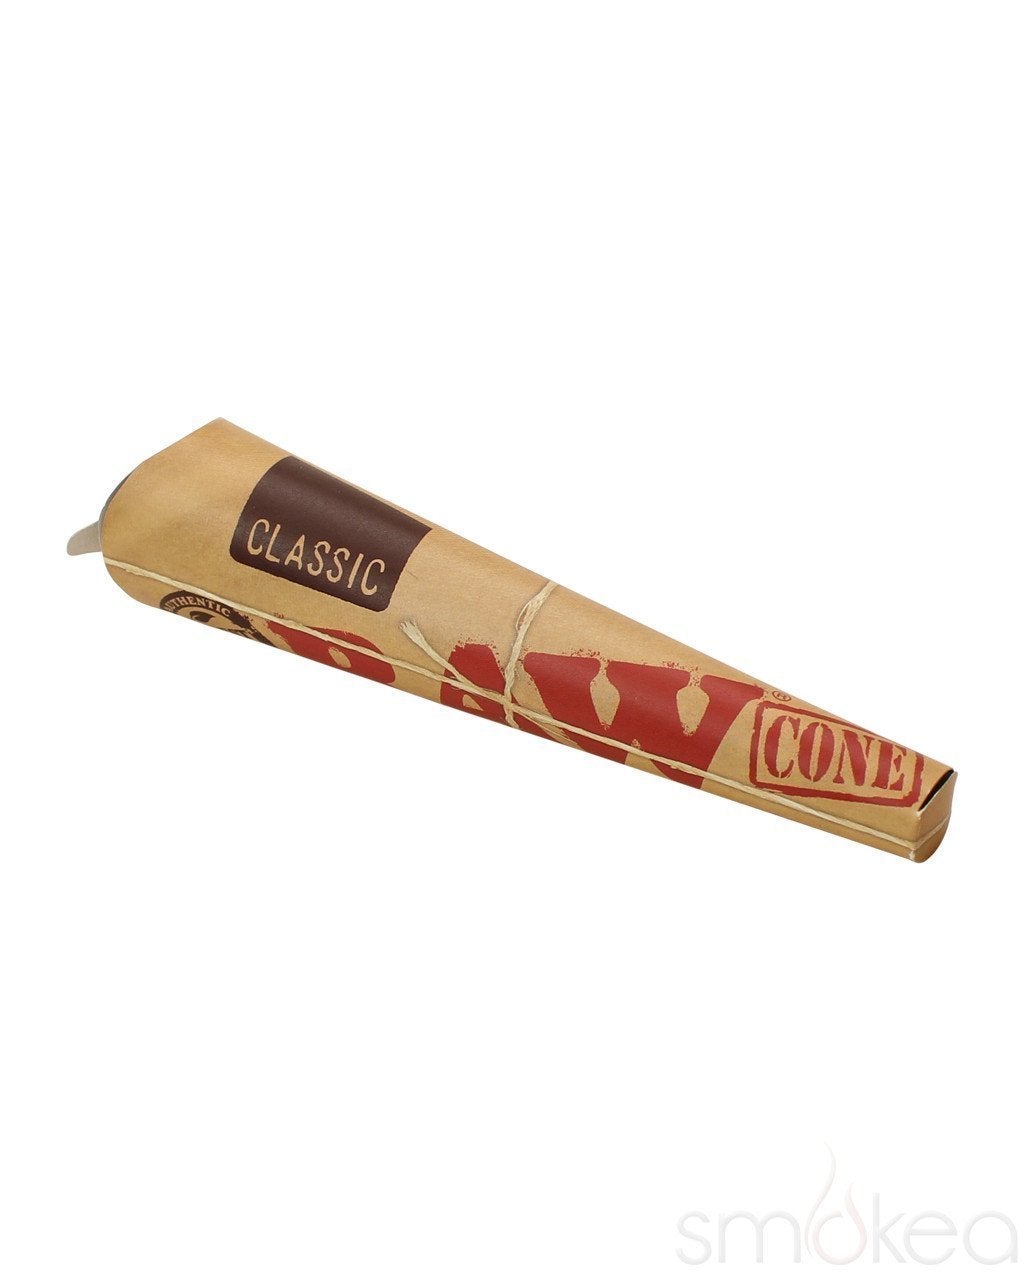 Raw Classic 1 1/4 Pre-Rolled Cones (6-Pack) - SMOKEA®